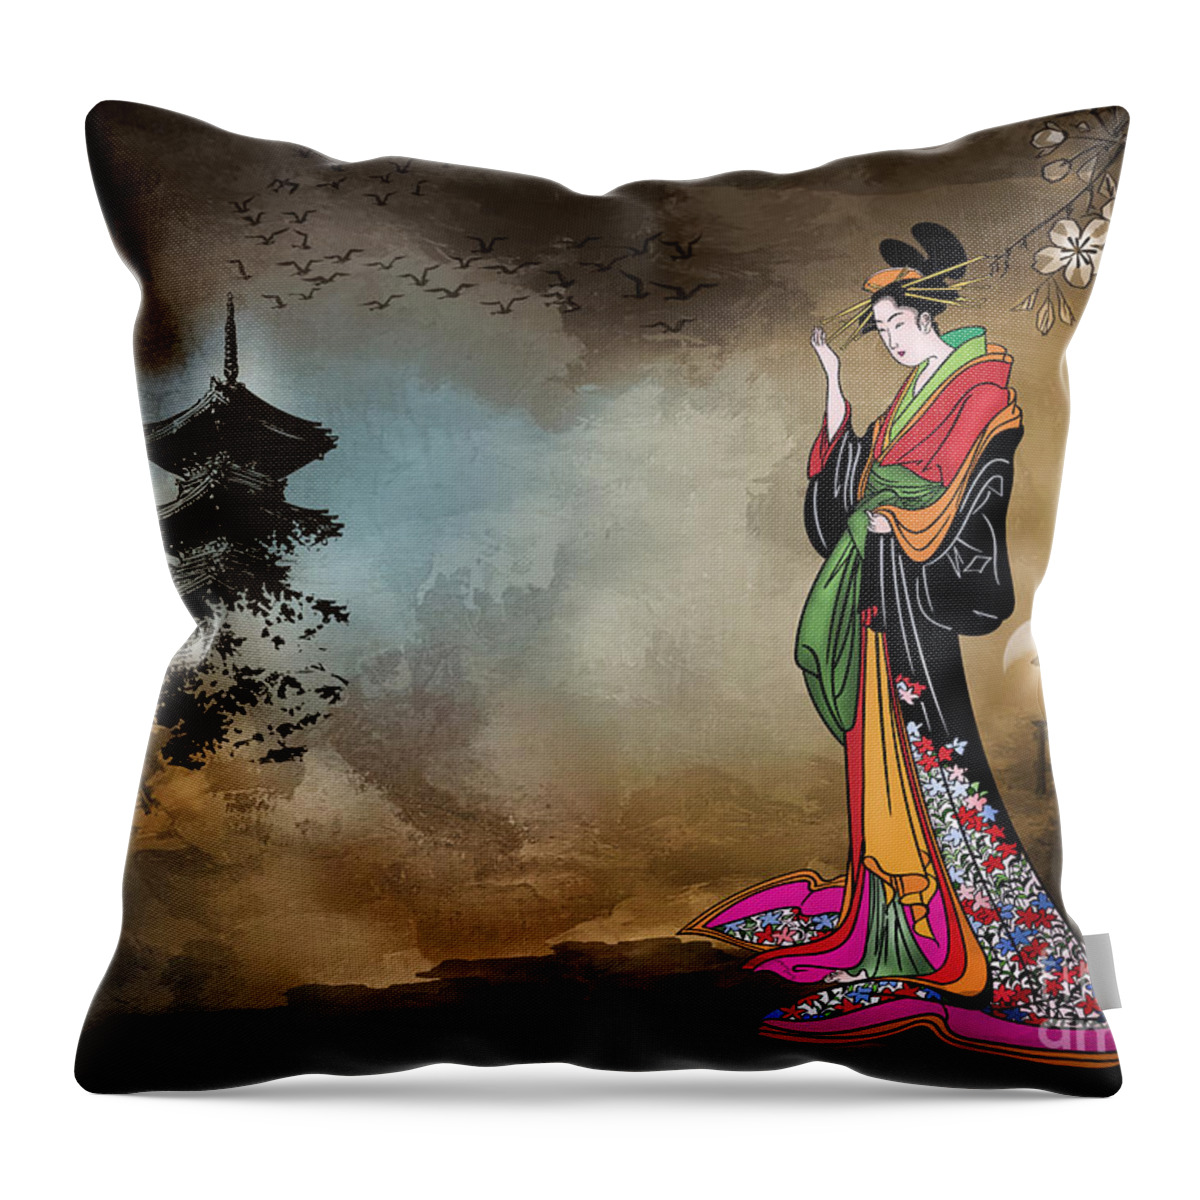 Geisha Throw Pillow featuring the digital art Japanese girl with a landscape in the background. by Andrzej Szczerski